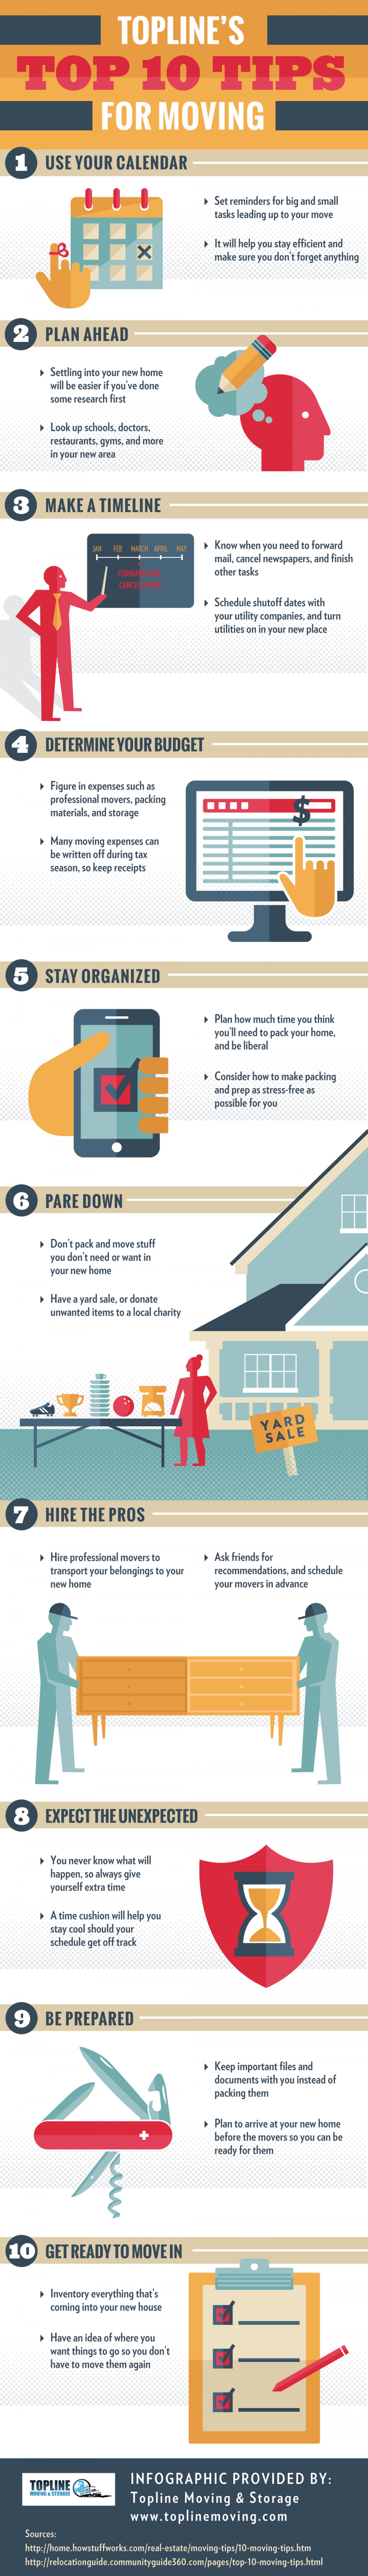 Topline’s Top 10 Tips for Moving Infographic